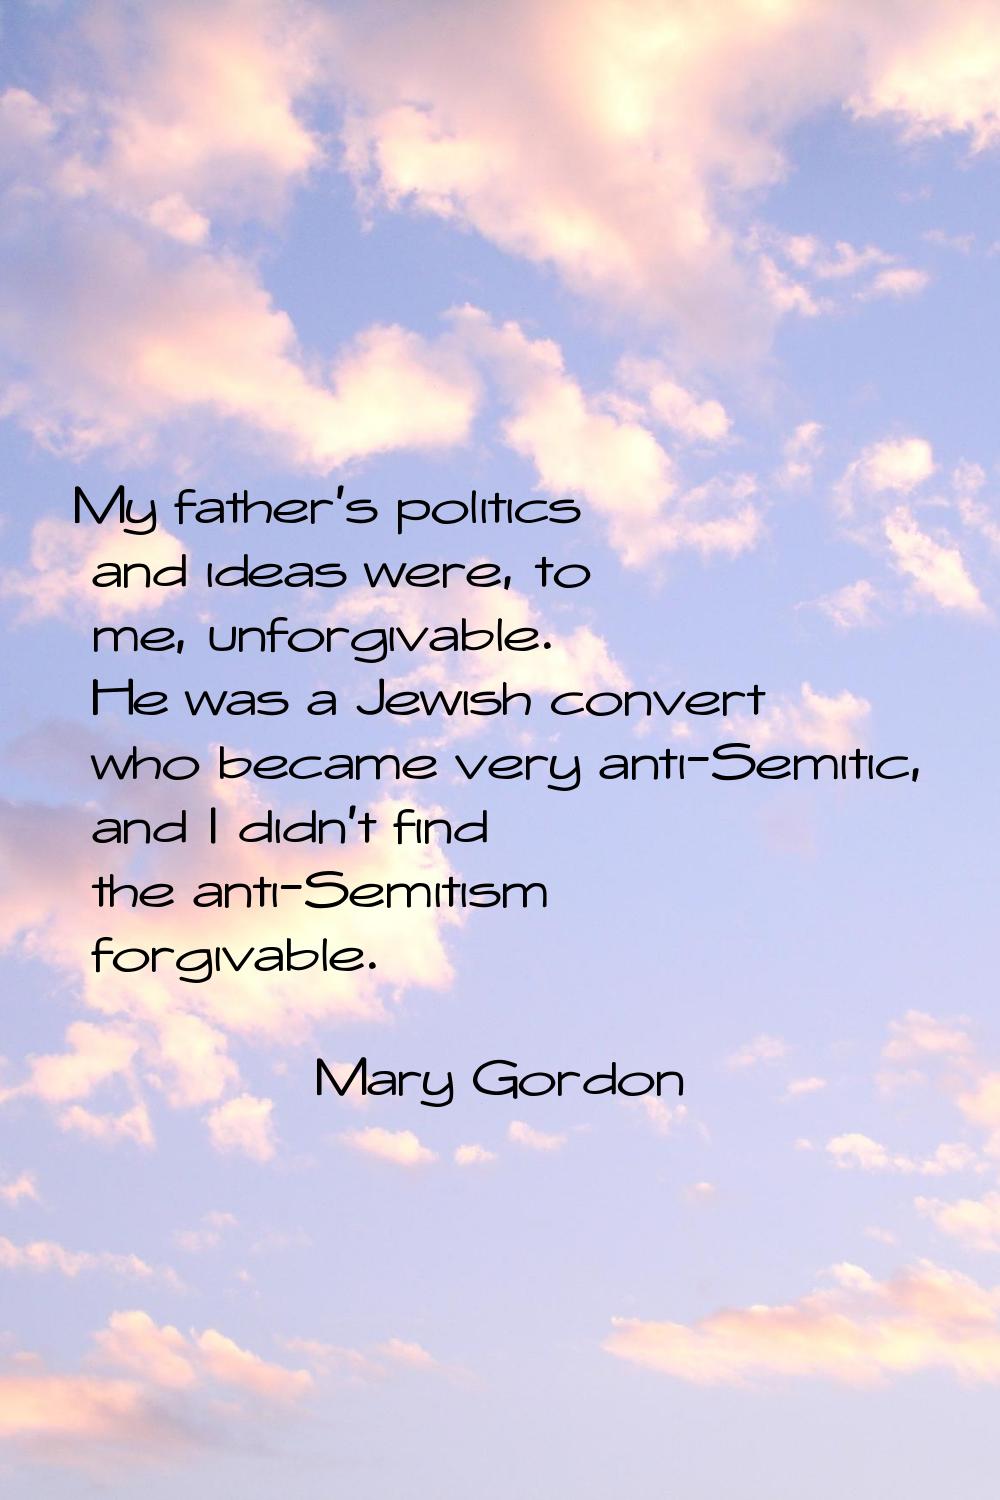 My father's politics and ideas were, to me, unforgivable. He was a Jewish convert who became very a